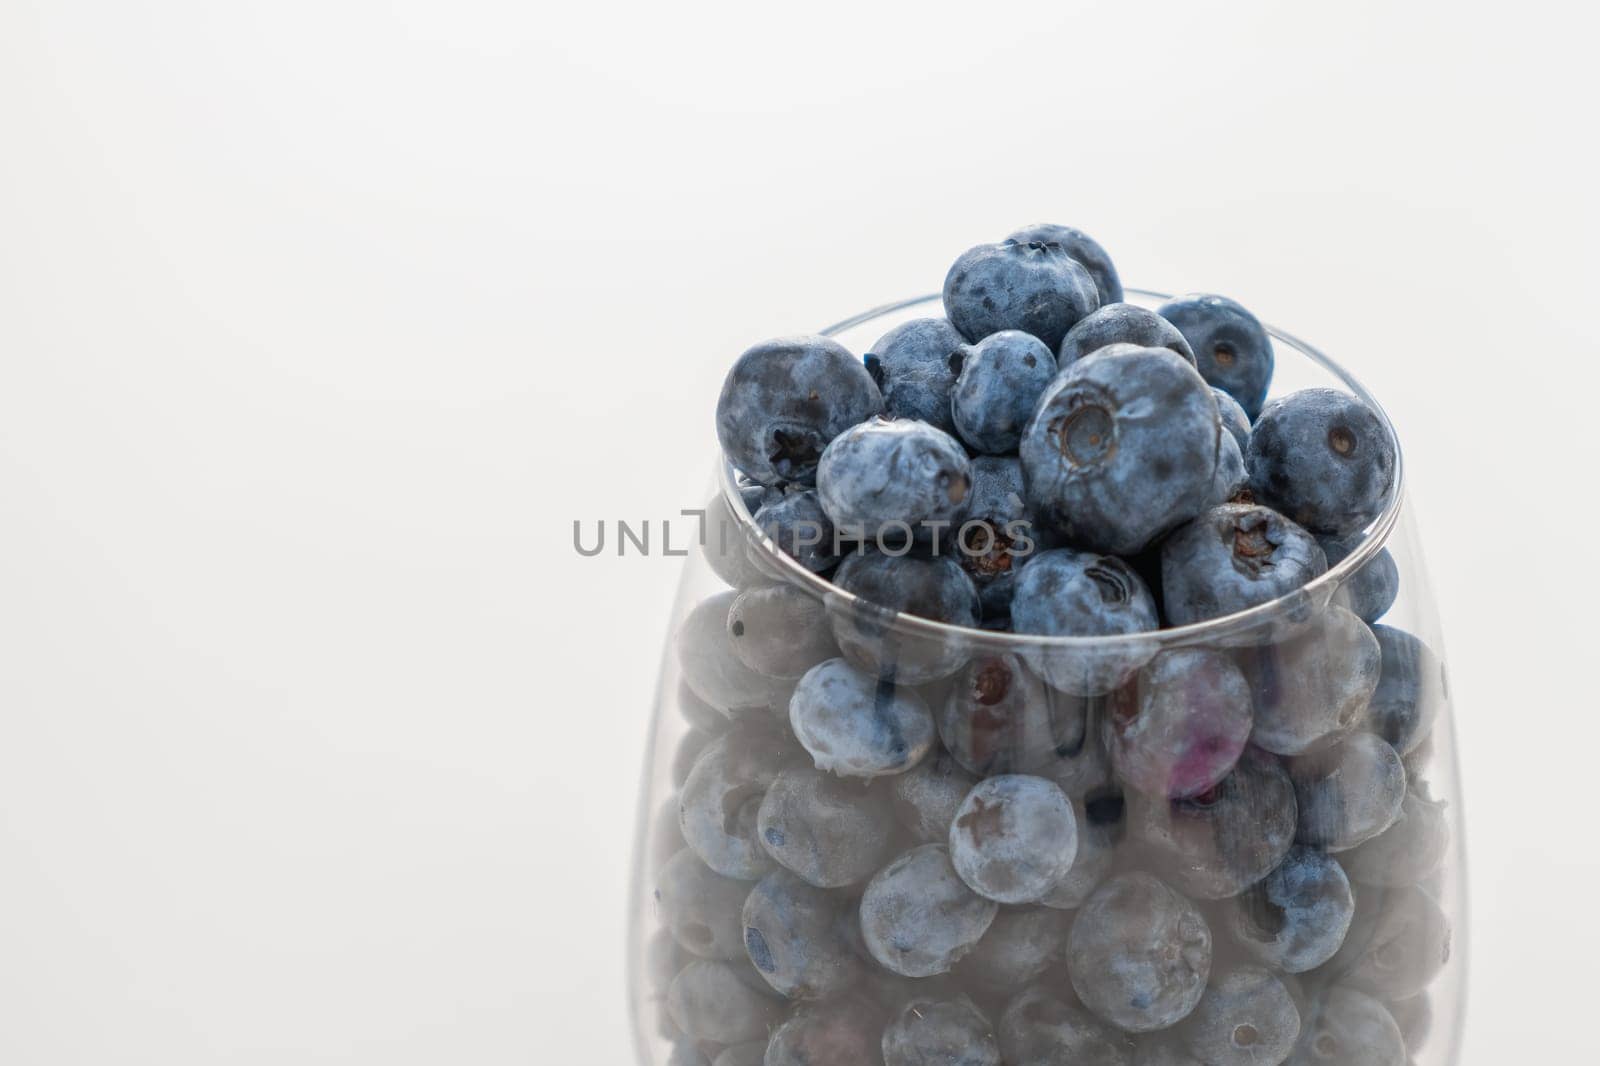 Glass bowl with blueberries on white table, close up.